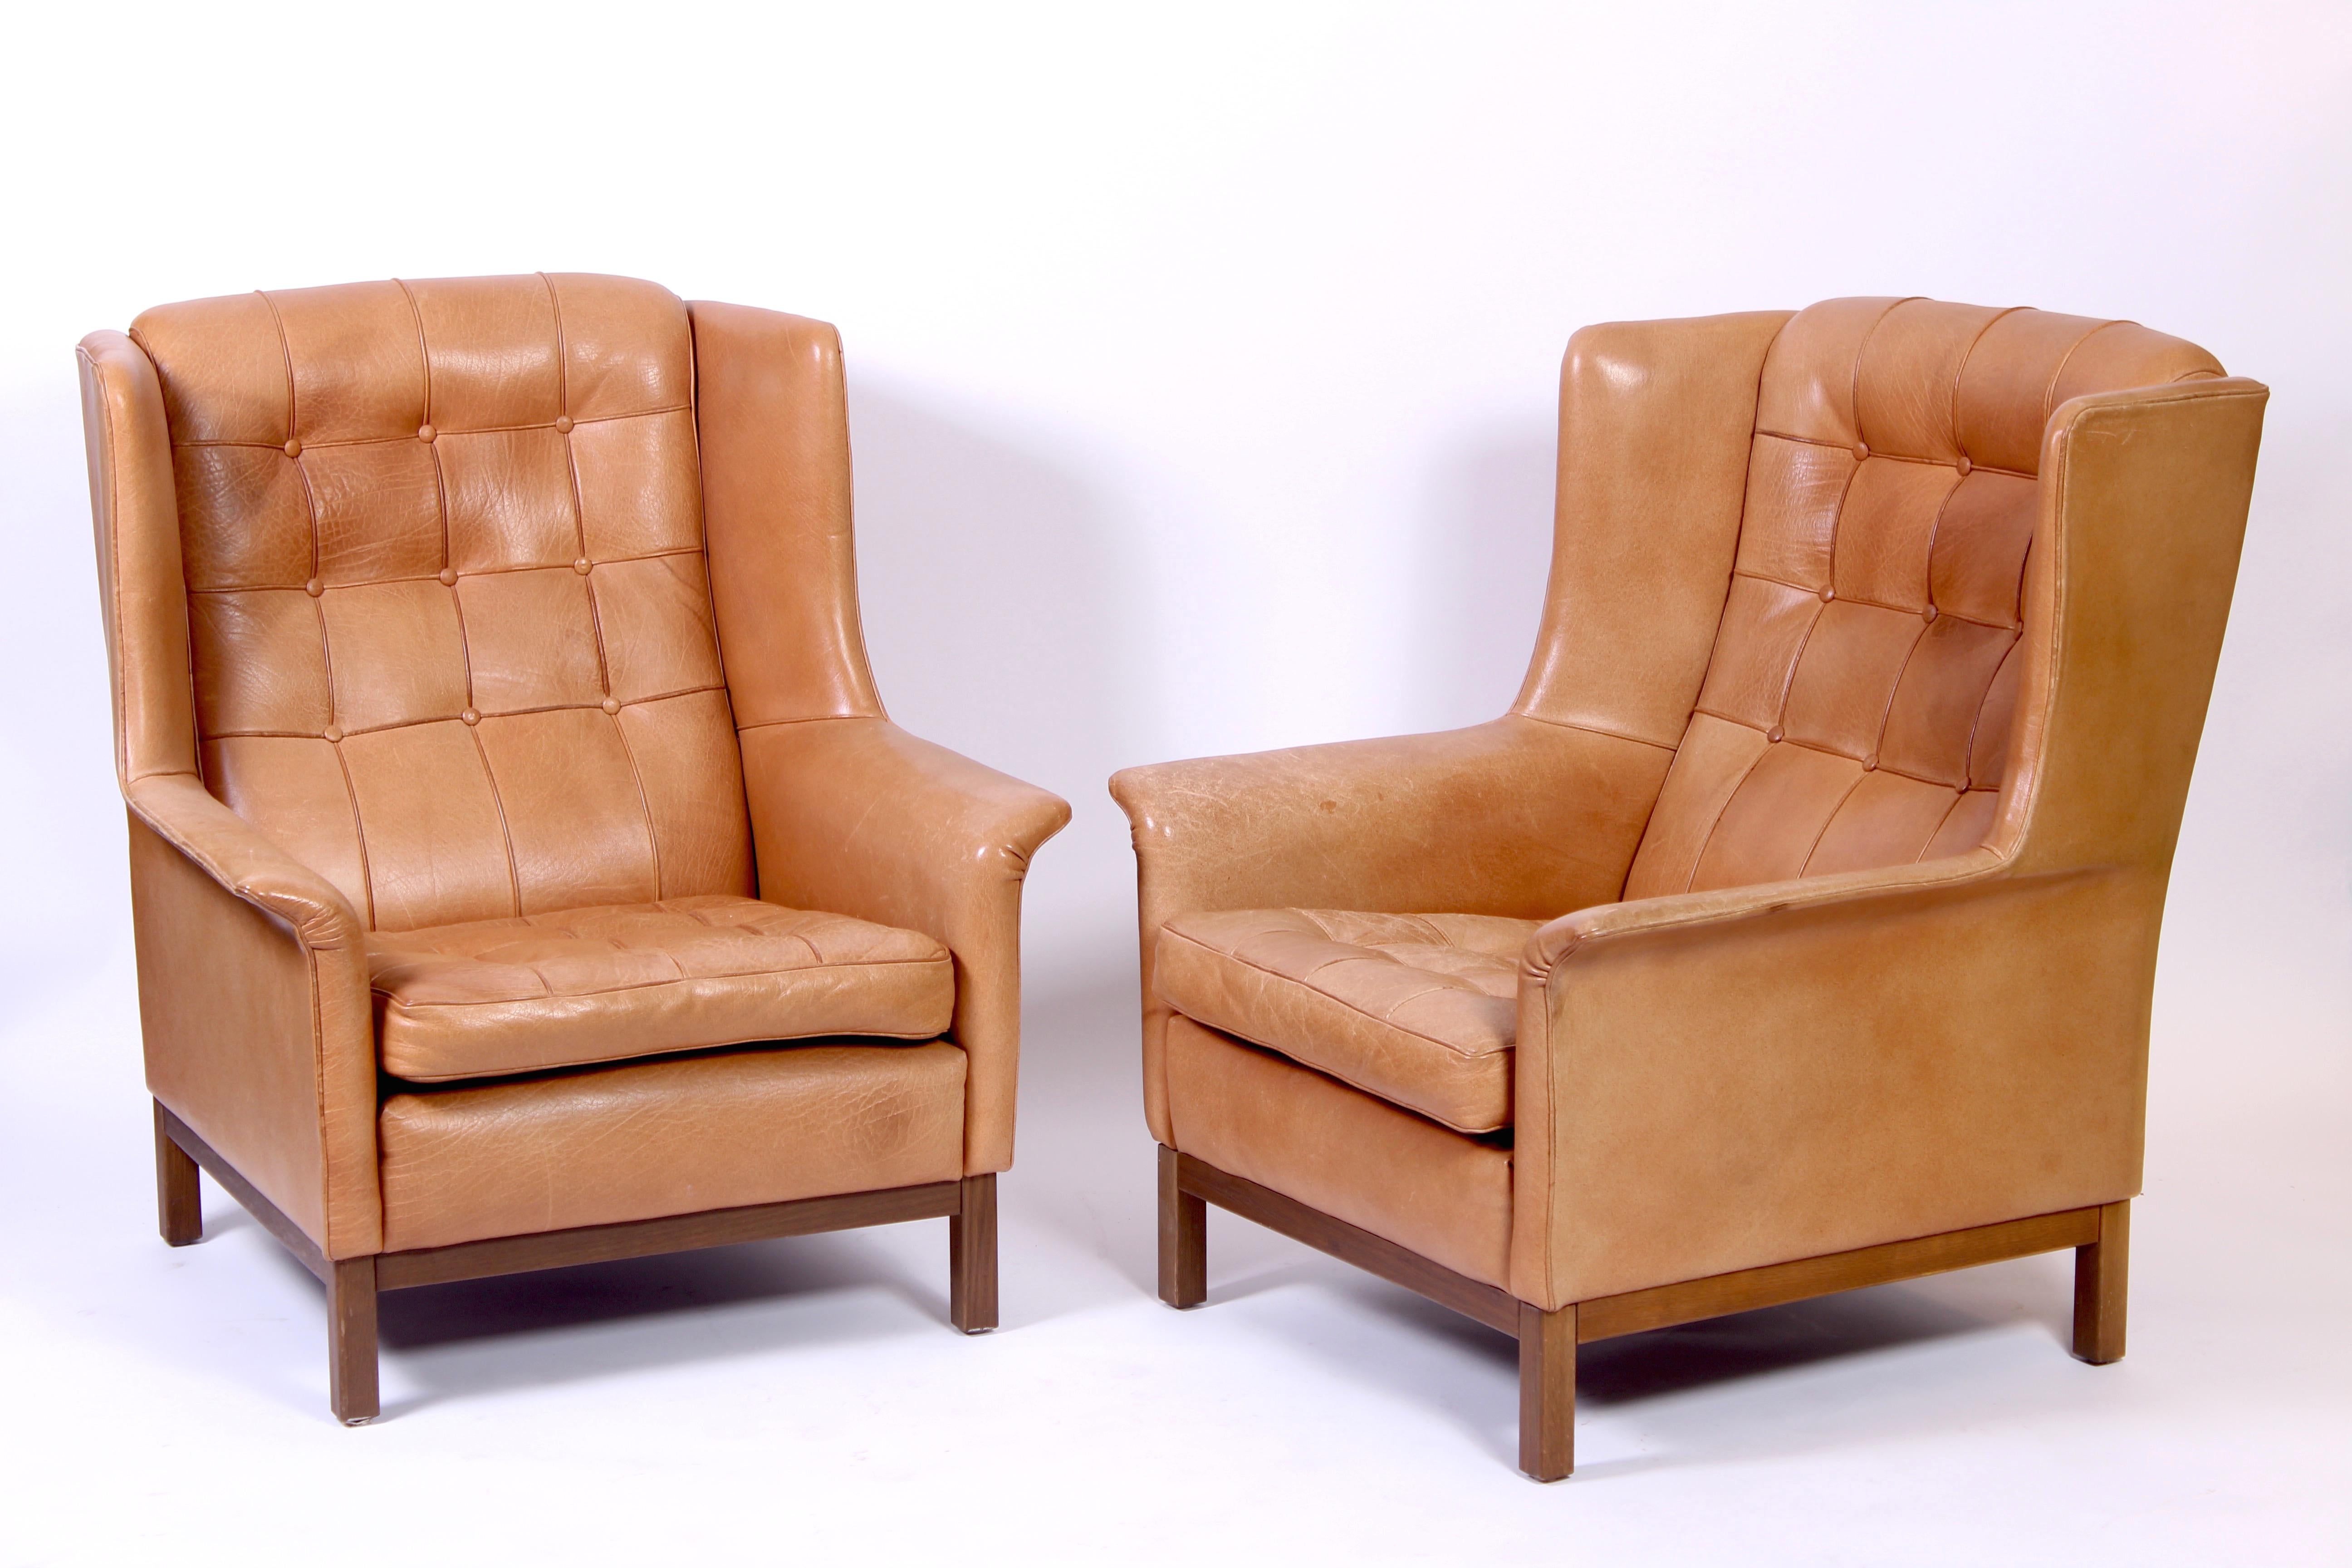 A pair of high quality midcentury lounge chairs by Swedish designer Arne Norell. The chairs has original thick buffalo leather with nice patina. The set also includes one ottoman on wheels that has the same patina.
Very good vintage condition with